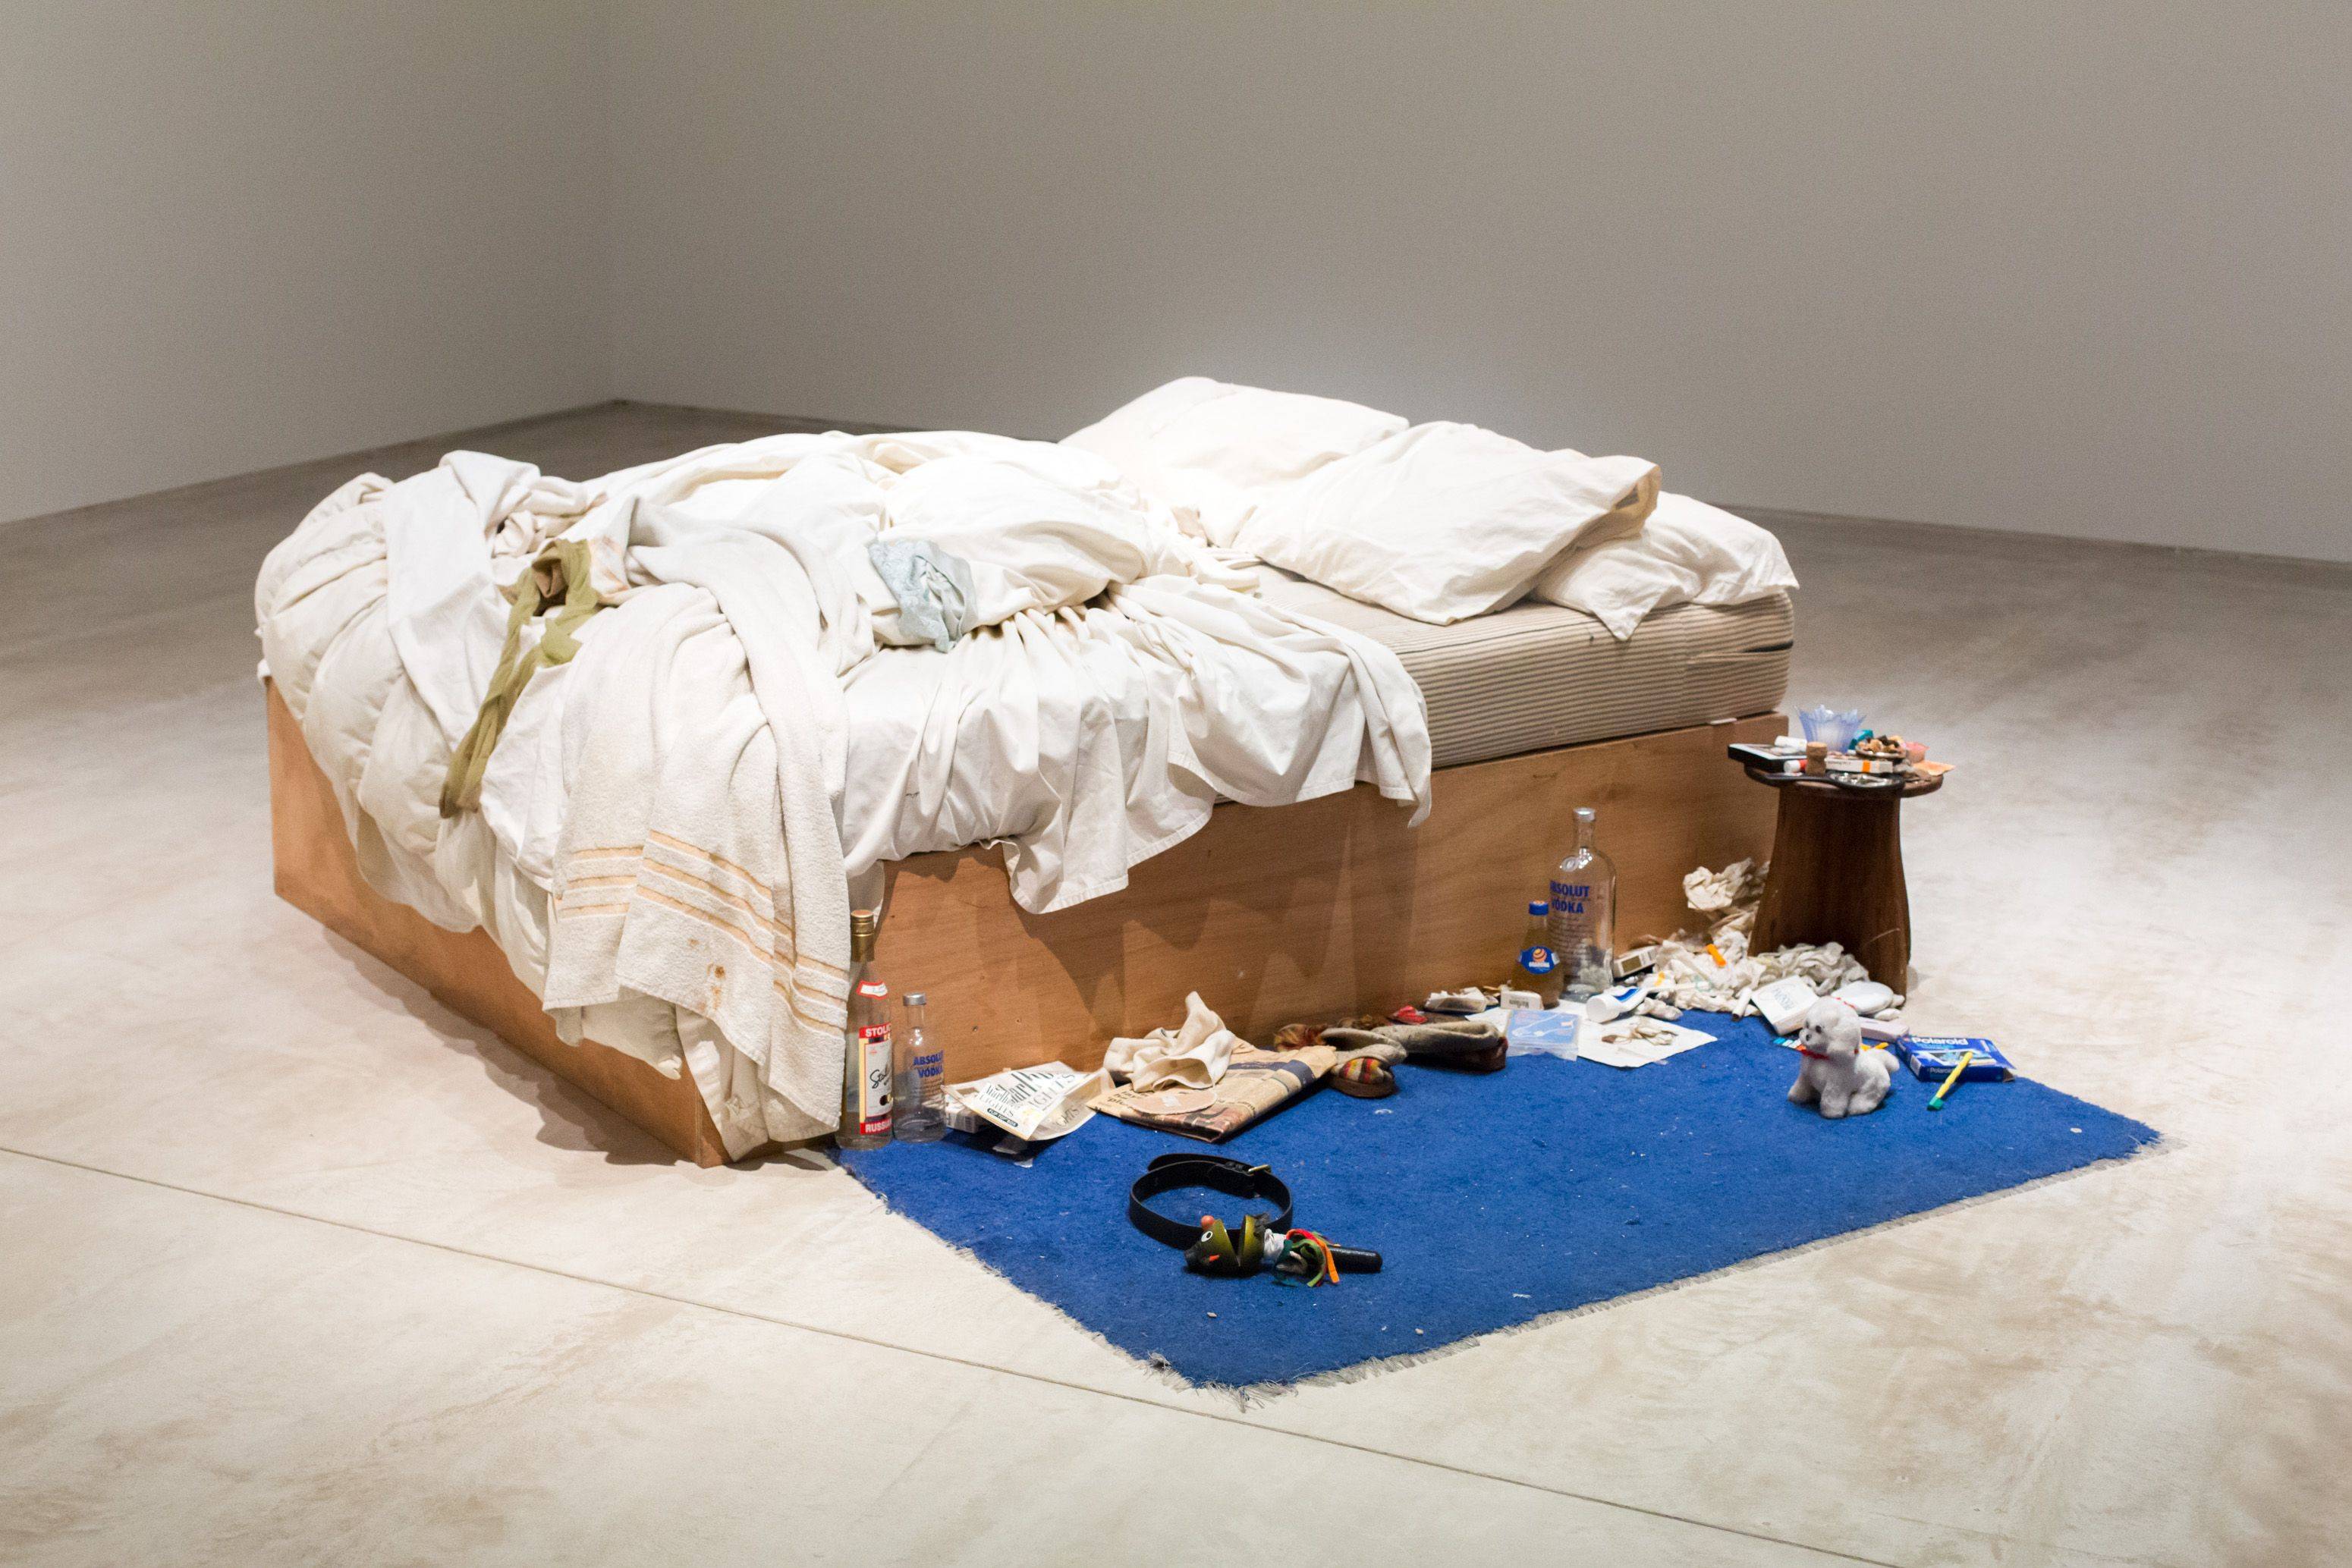 "My bed" Tracey Emin 1998